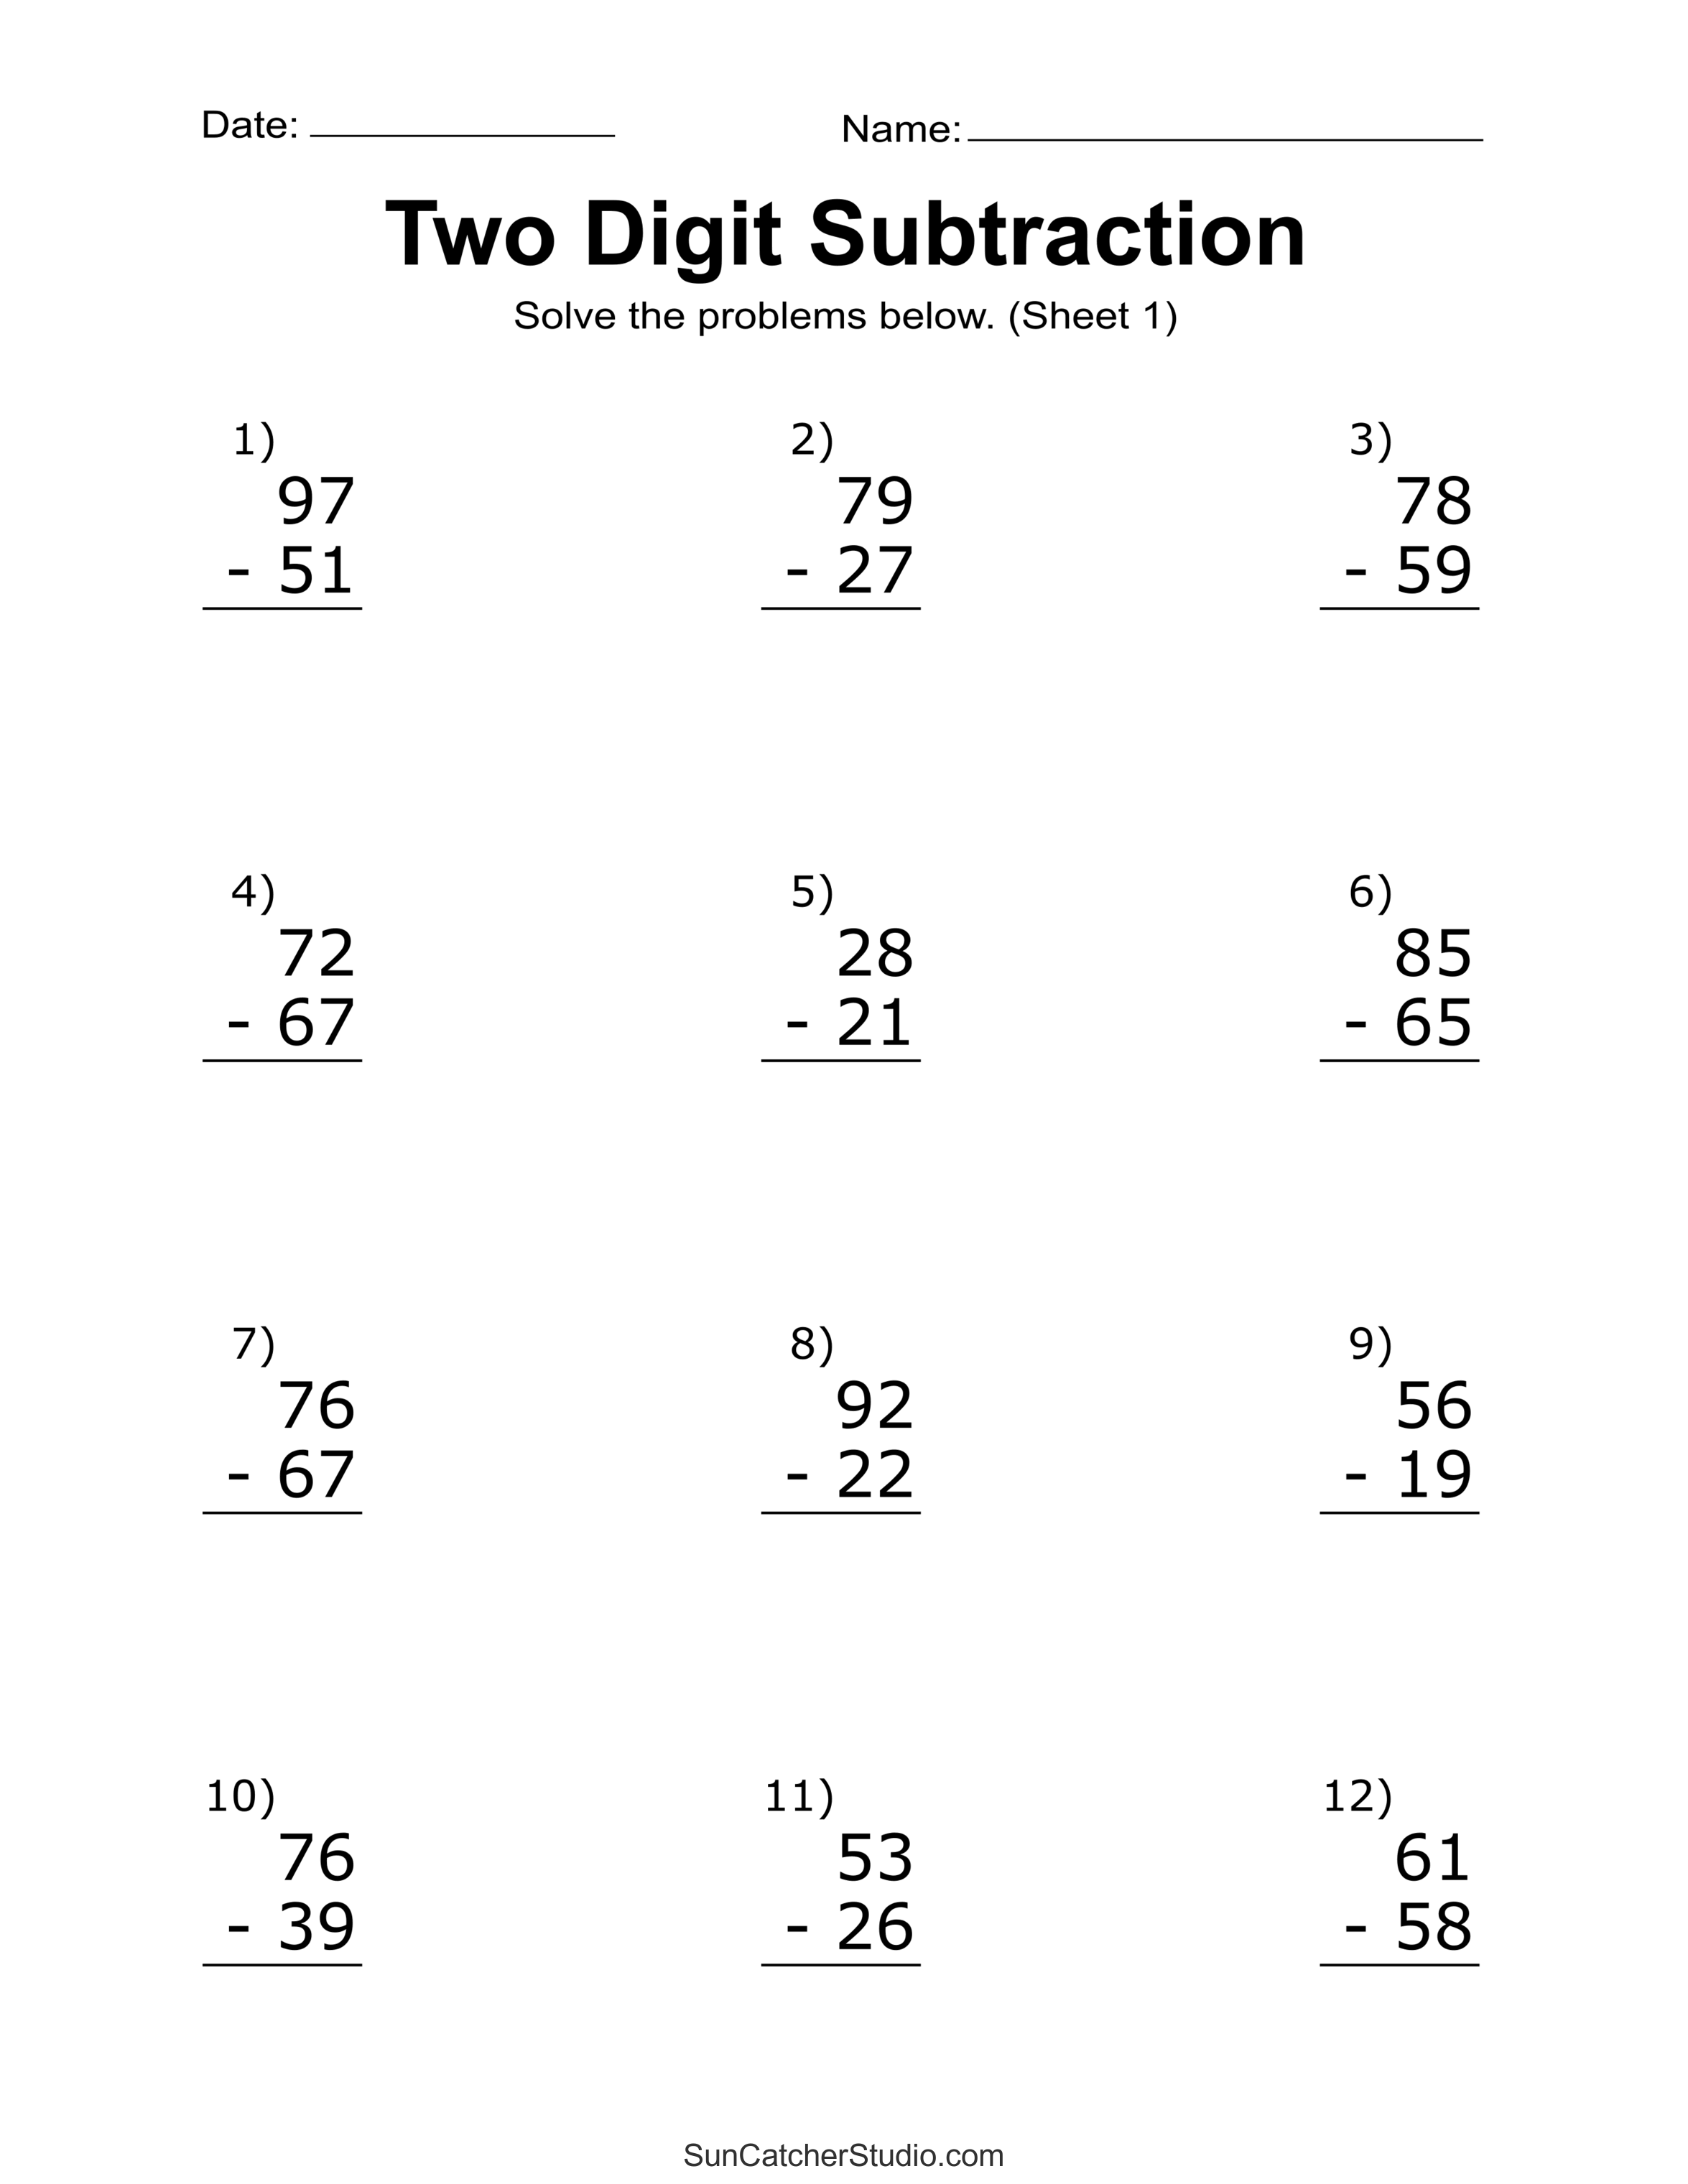 two-digit-subtraction-worksheets-printable-math-drills-diy-projects